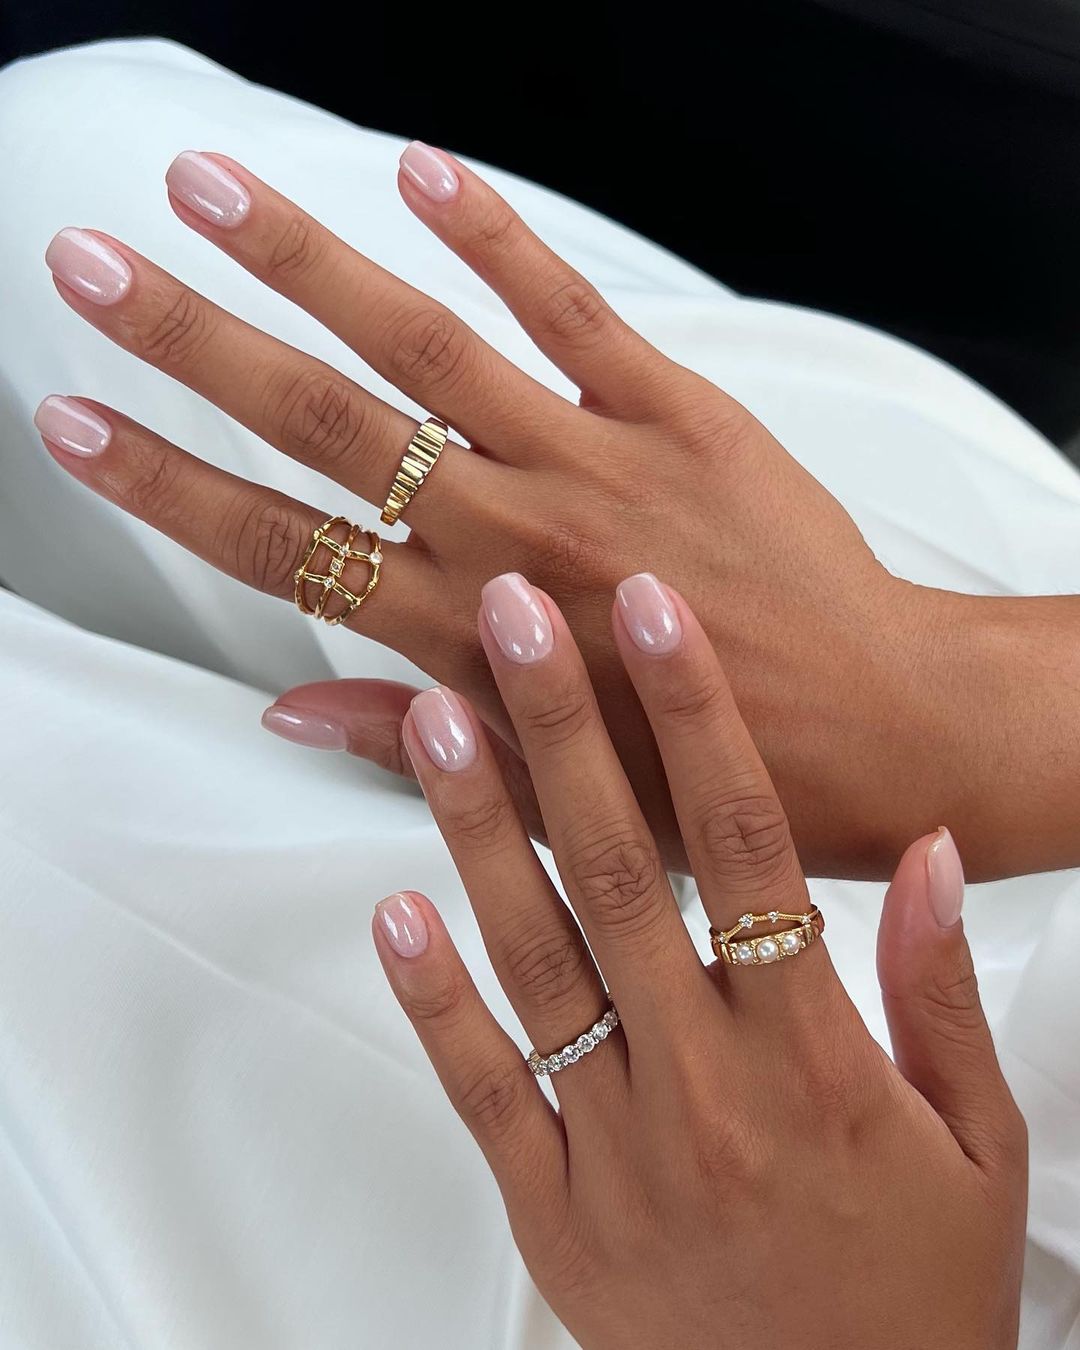 2023 Nail Trends: Nail Trends, Colours & Nail Art To Try In 2023 |  BEAUTY/crew